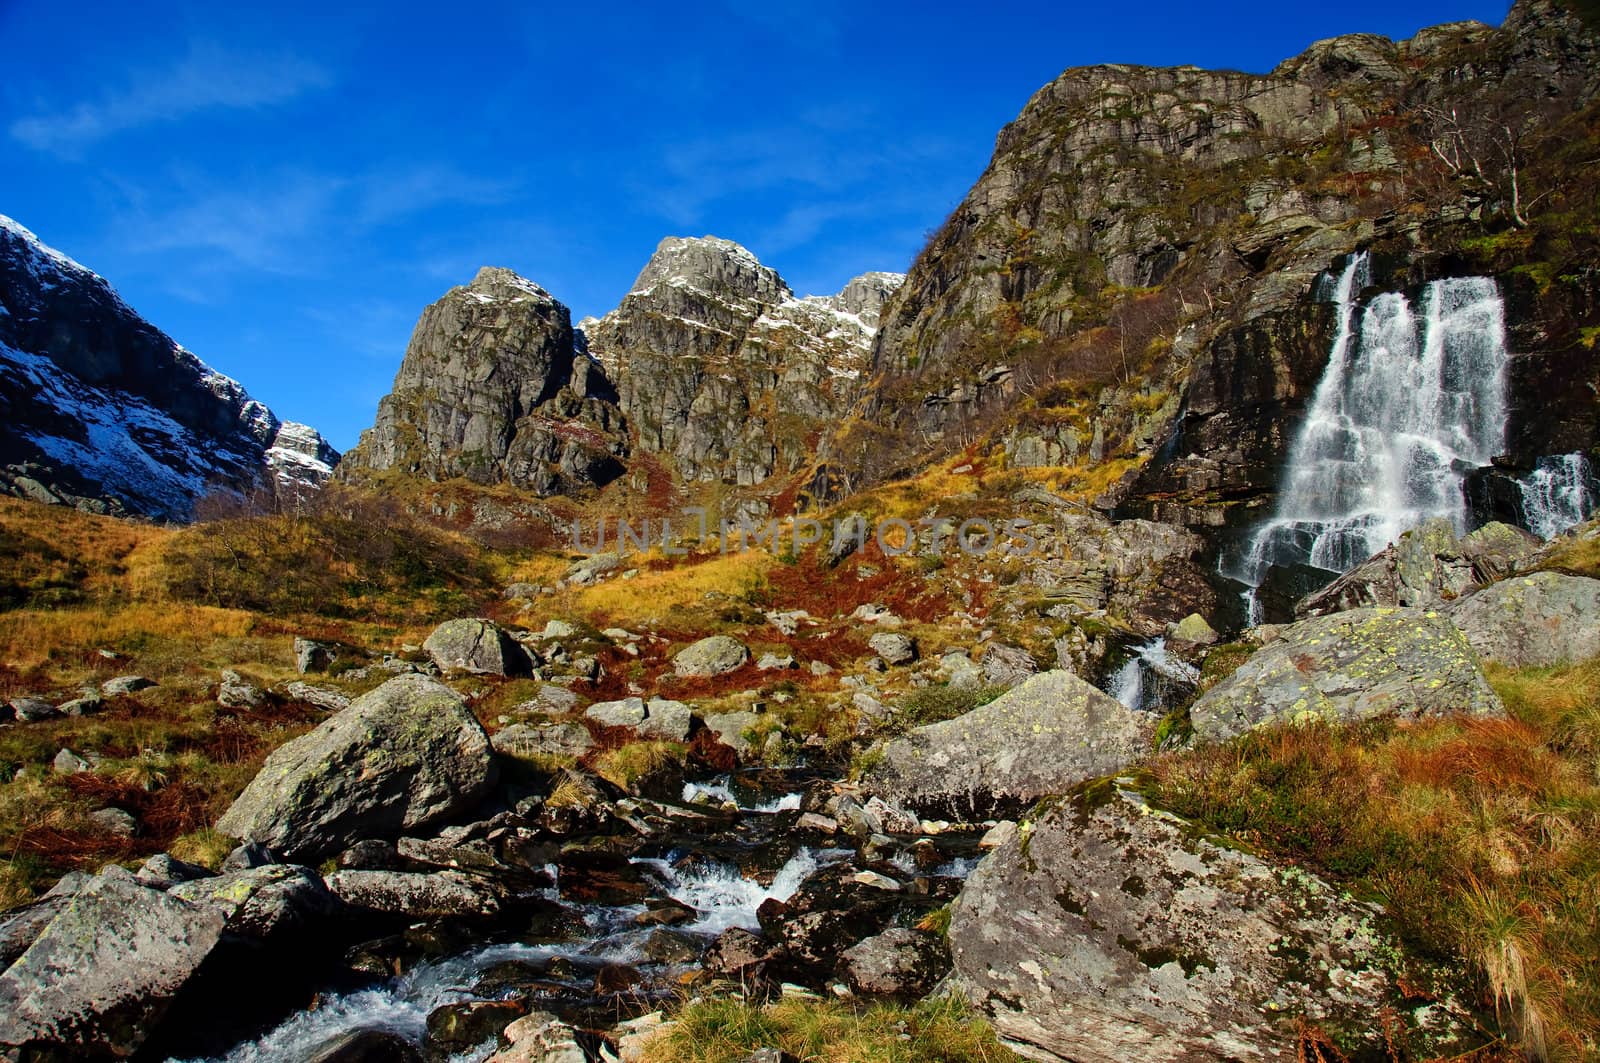 A small waterfall in the mountains.  Still autumn but the first snow is sprinkled on the peaks